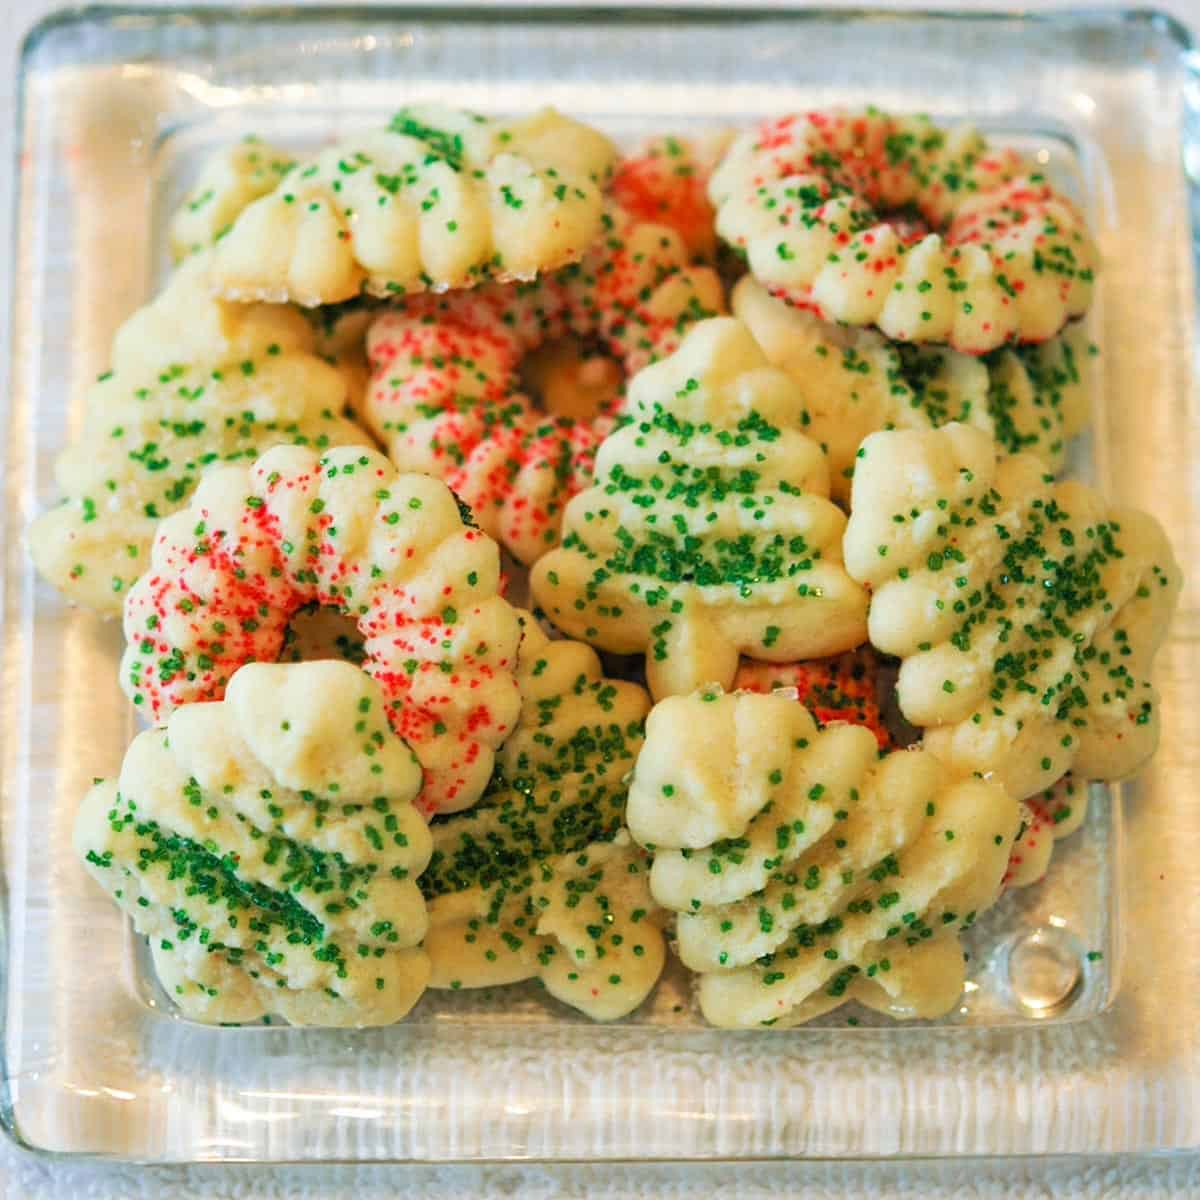 Tender Cream cheese spritz cookies on a clear glass plate.